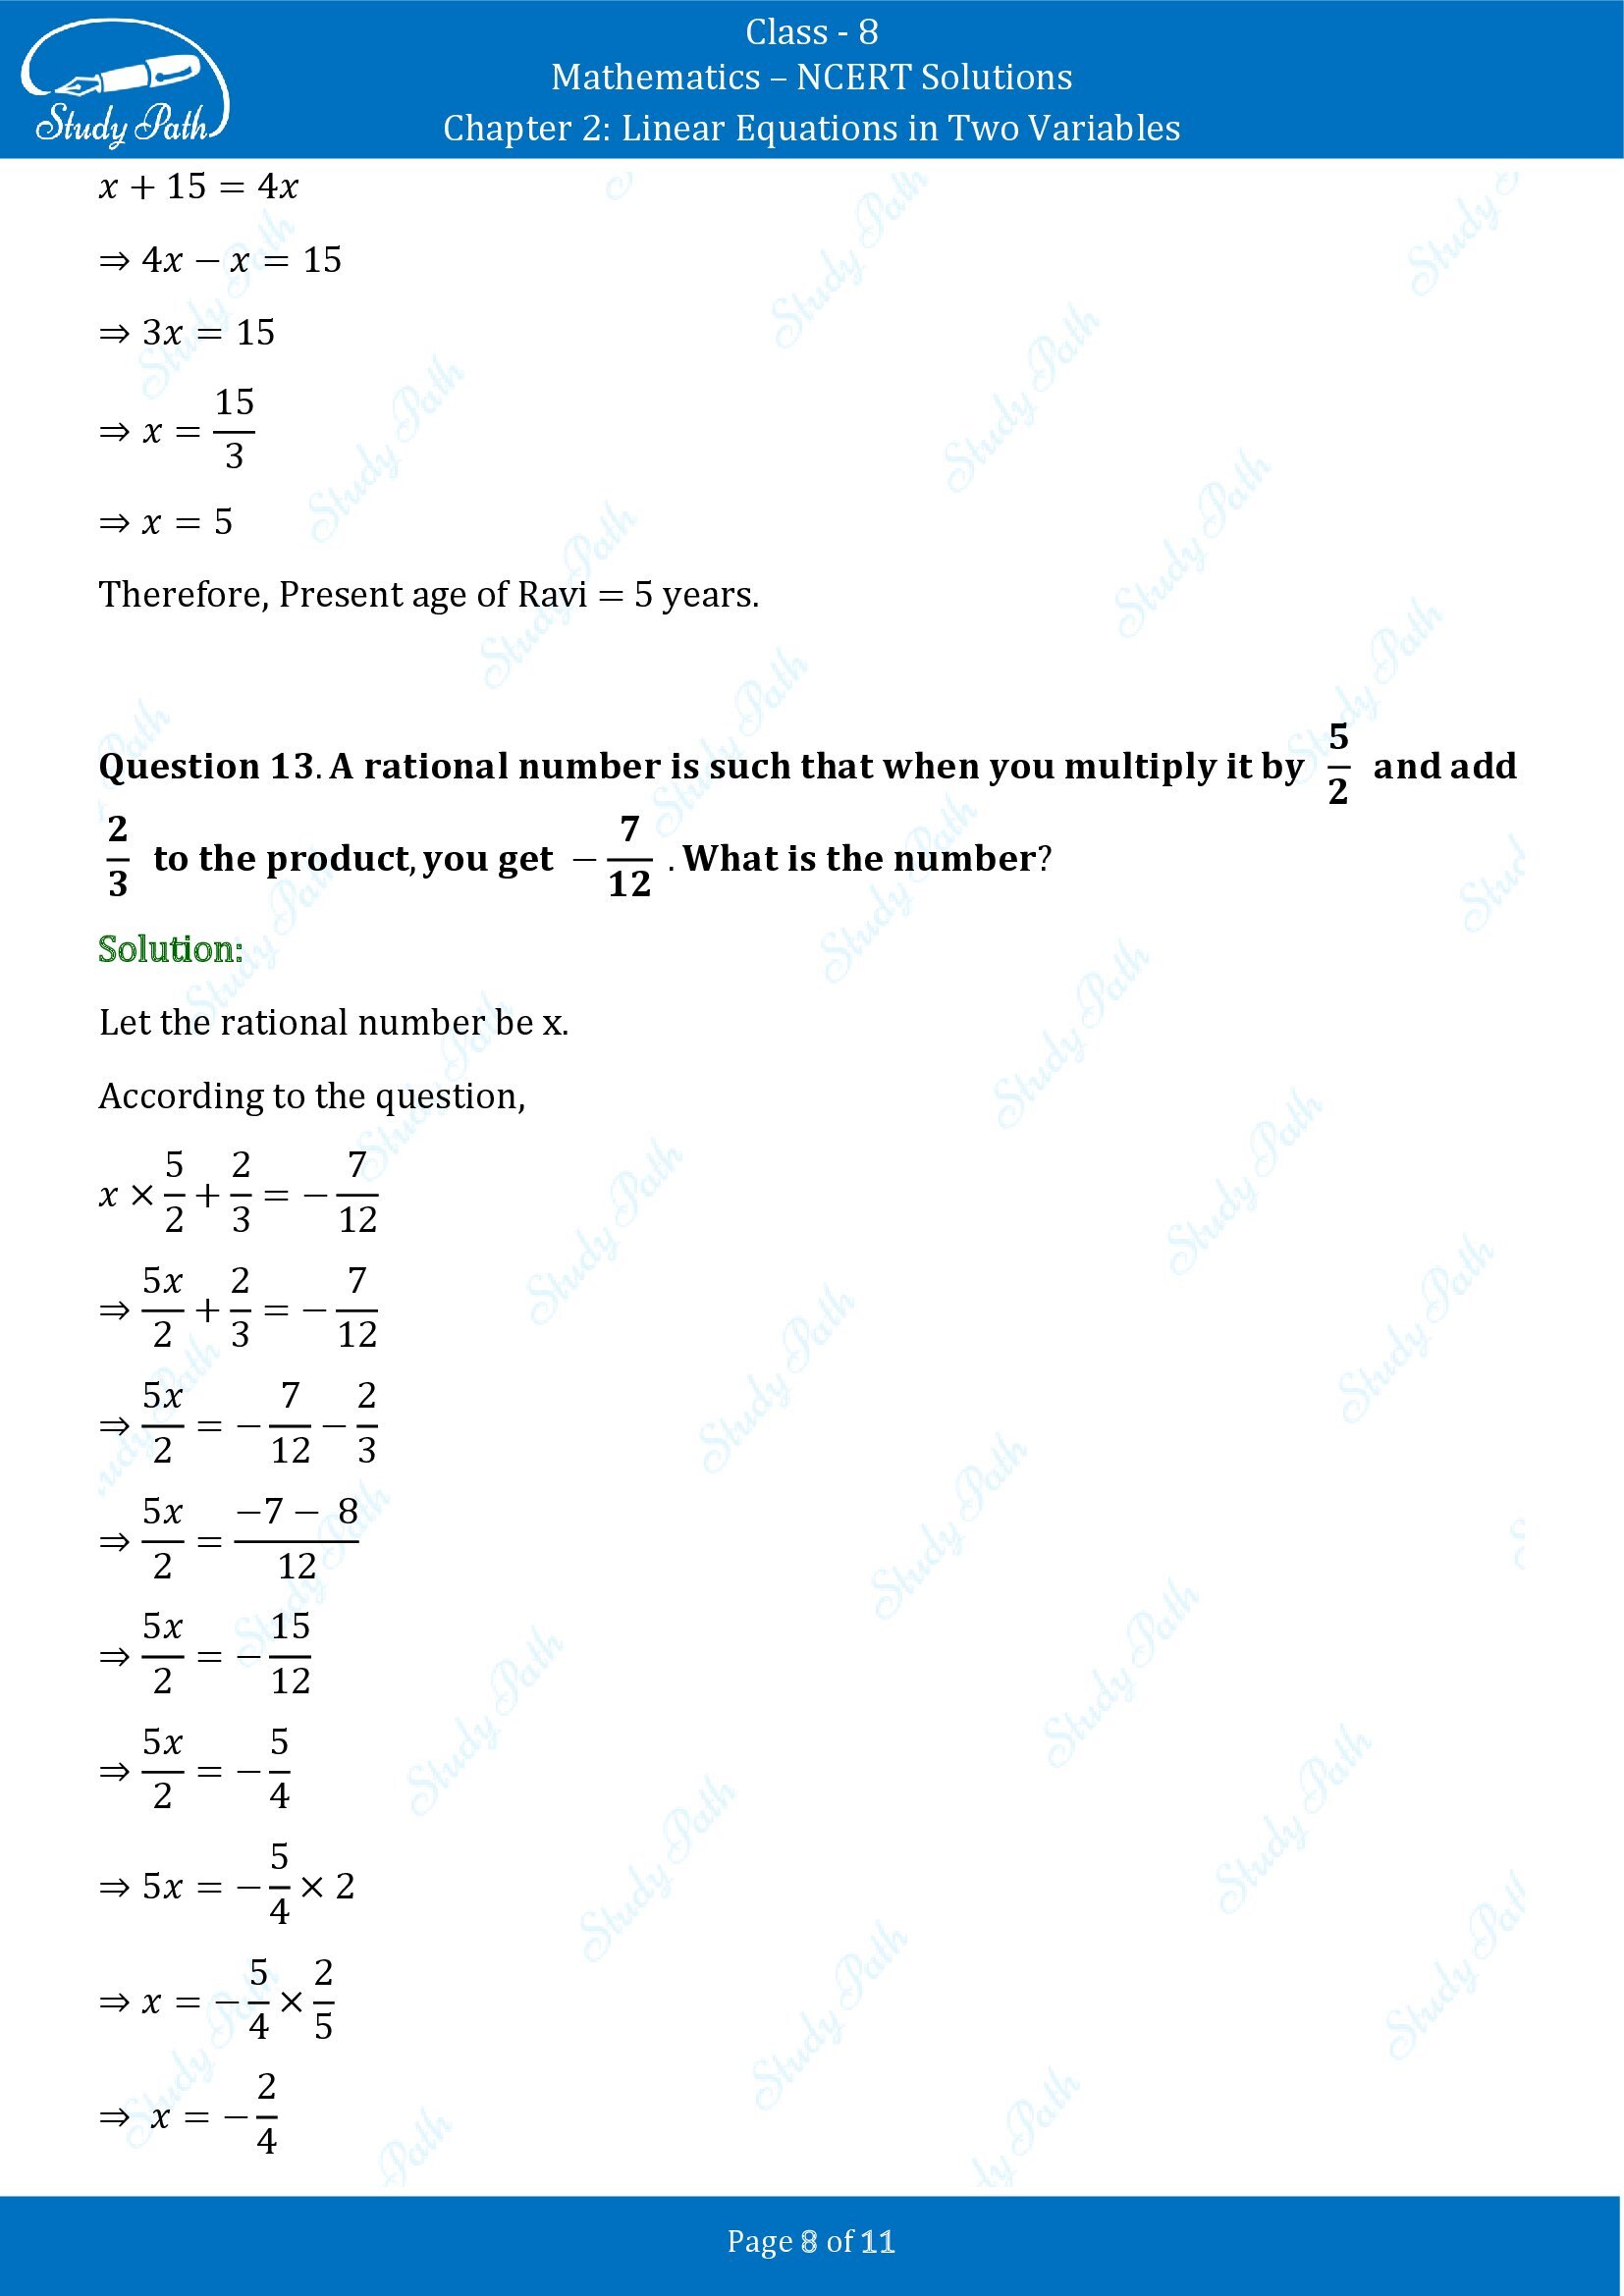 NCERT Solutions for Class 8 Maths Chapter 2 Linear Equations in Two Variables Exercise 2.2 00008